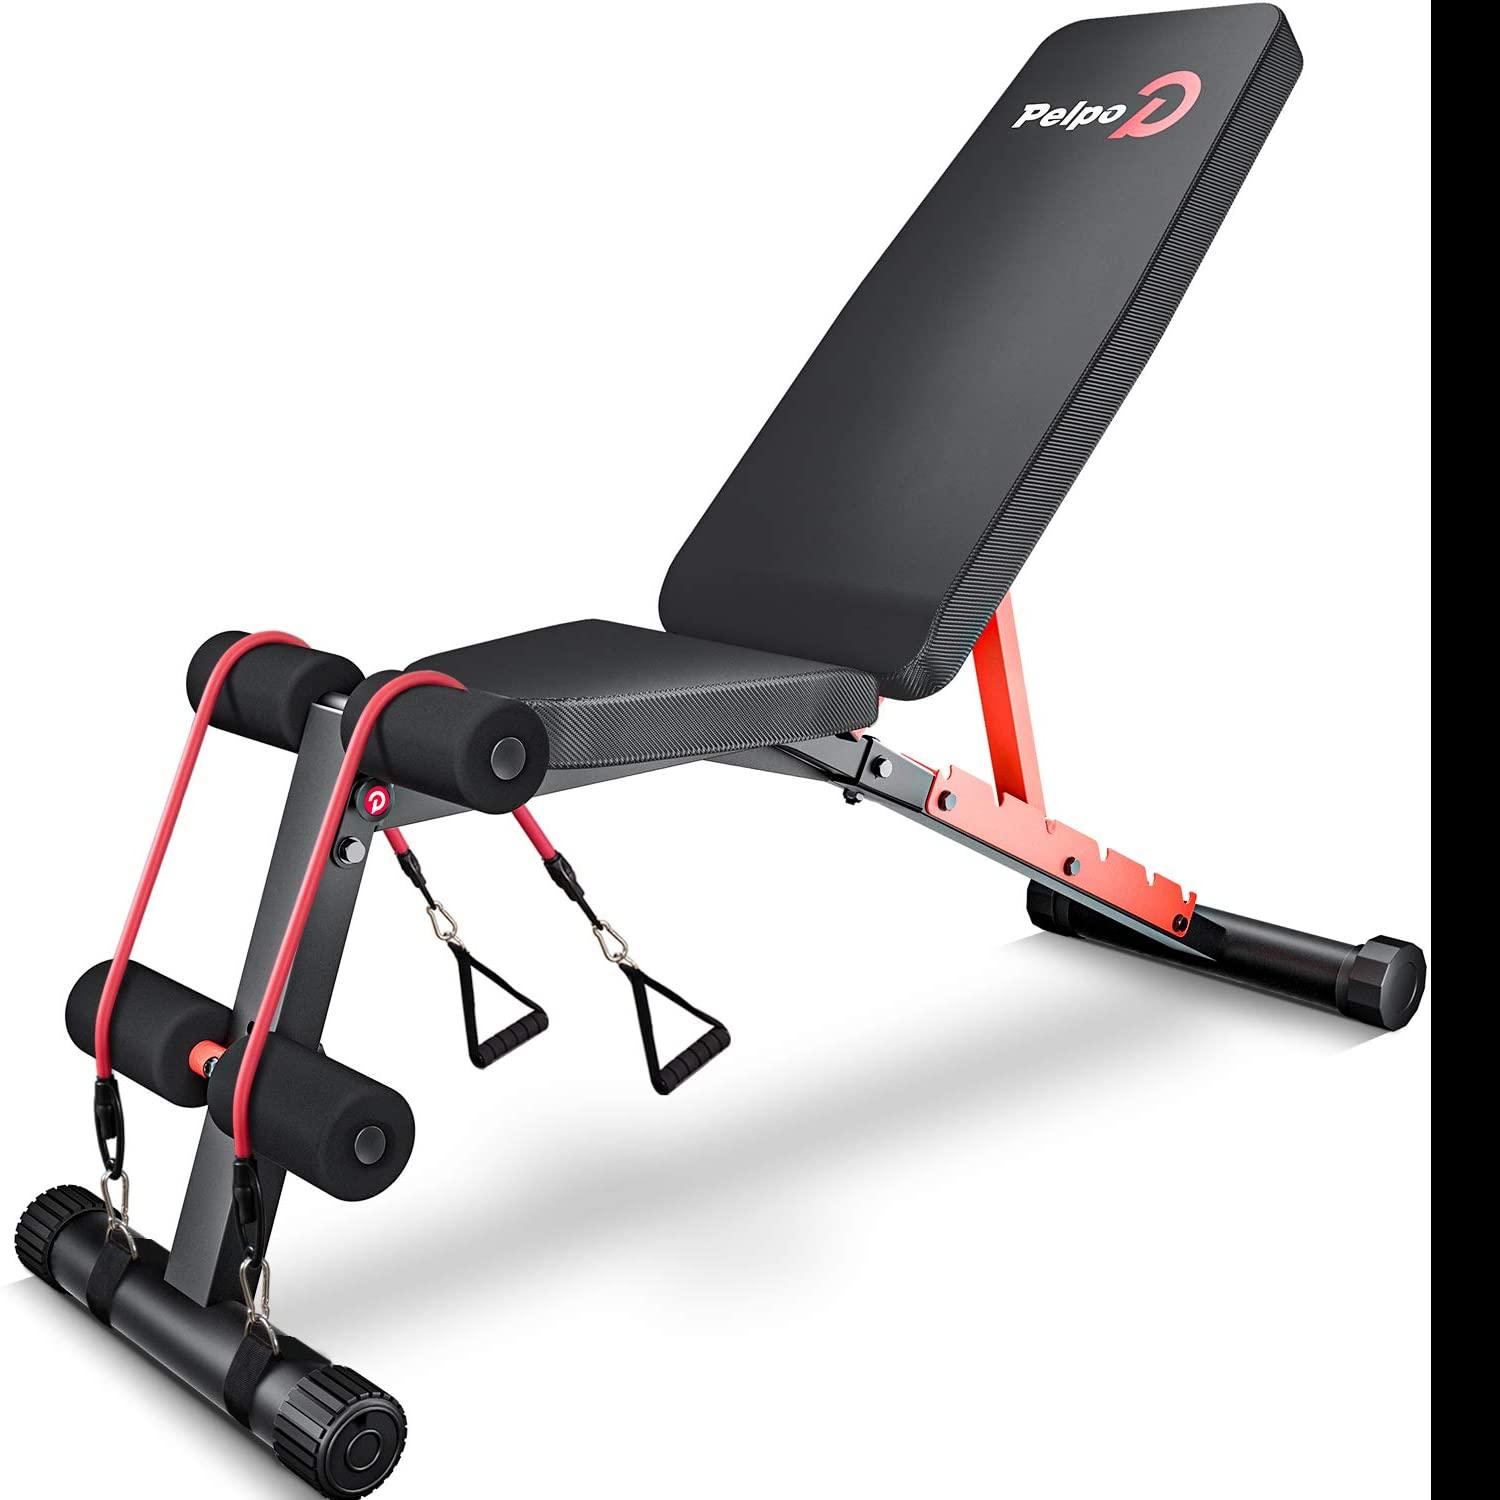 Weight Bench for Full Body Exercise for $49.99 Shipped